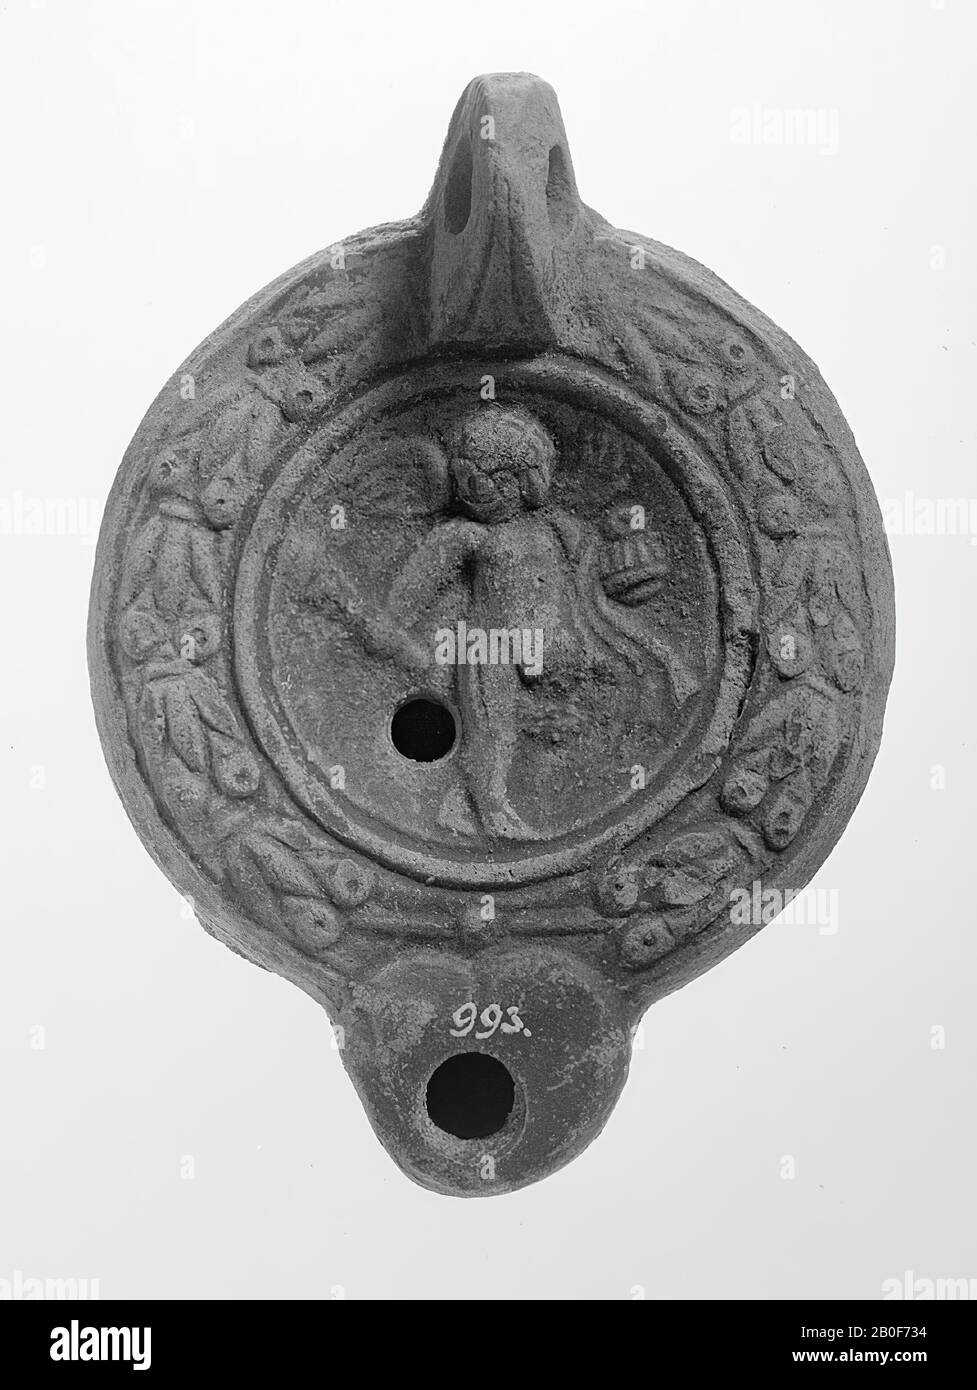 A gray-gray lamp with a round body on a round base. The hollow, round mirror is surrounded with concentric circles and decorated with a relief of a standing Eros with a torch. The small filling hole is located at the bottom left of the figure. The shoulder is decorated with a laurel wreath and berries. The blunt spout is rounded off, has a large burn hole and the incidence is heart-shaped with a relief point and stripe above it. The vertically attached ear is decorated with notches. The underside of the spout is shaded. Brand: two relief points., Oil lamp, earthenware, terracotta, 4.4 x 10.4 x Stock Photo